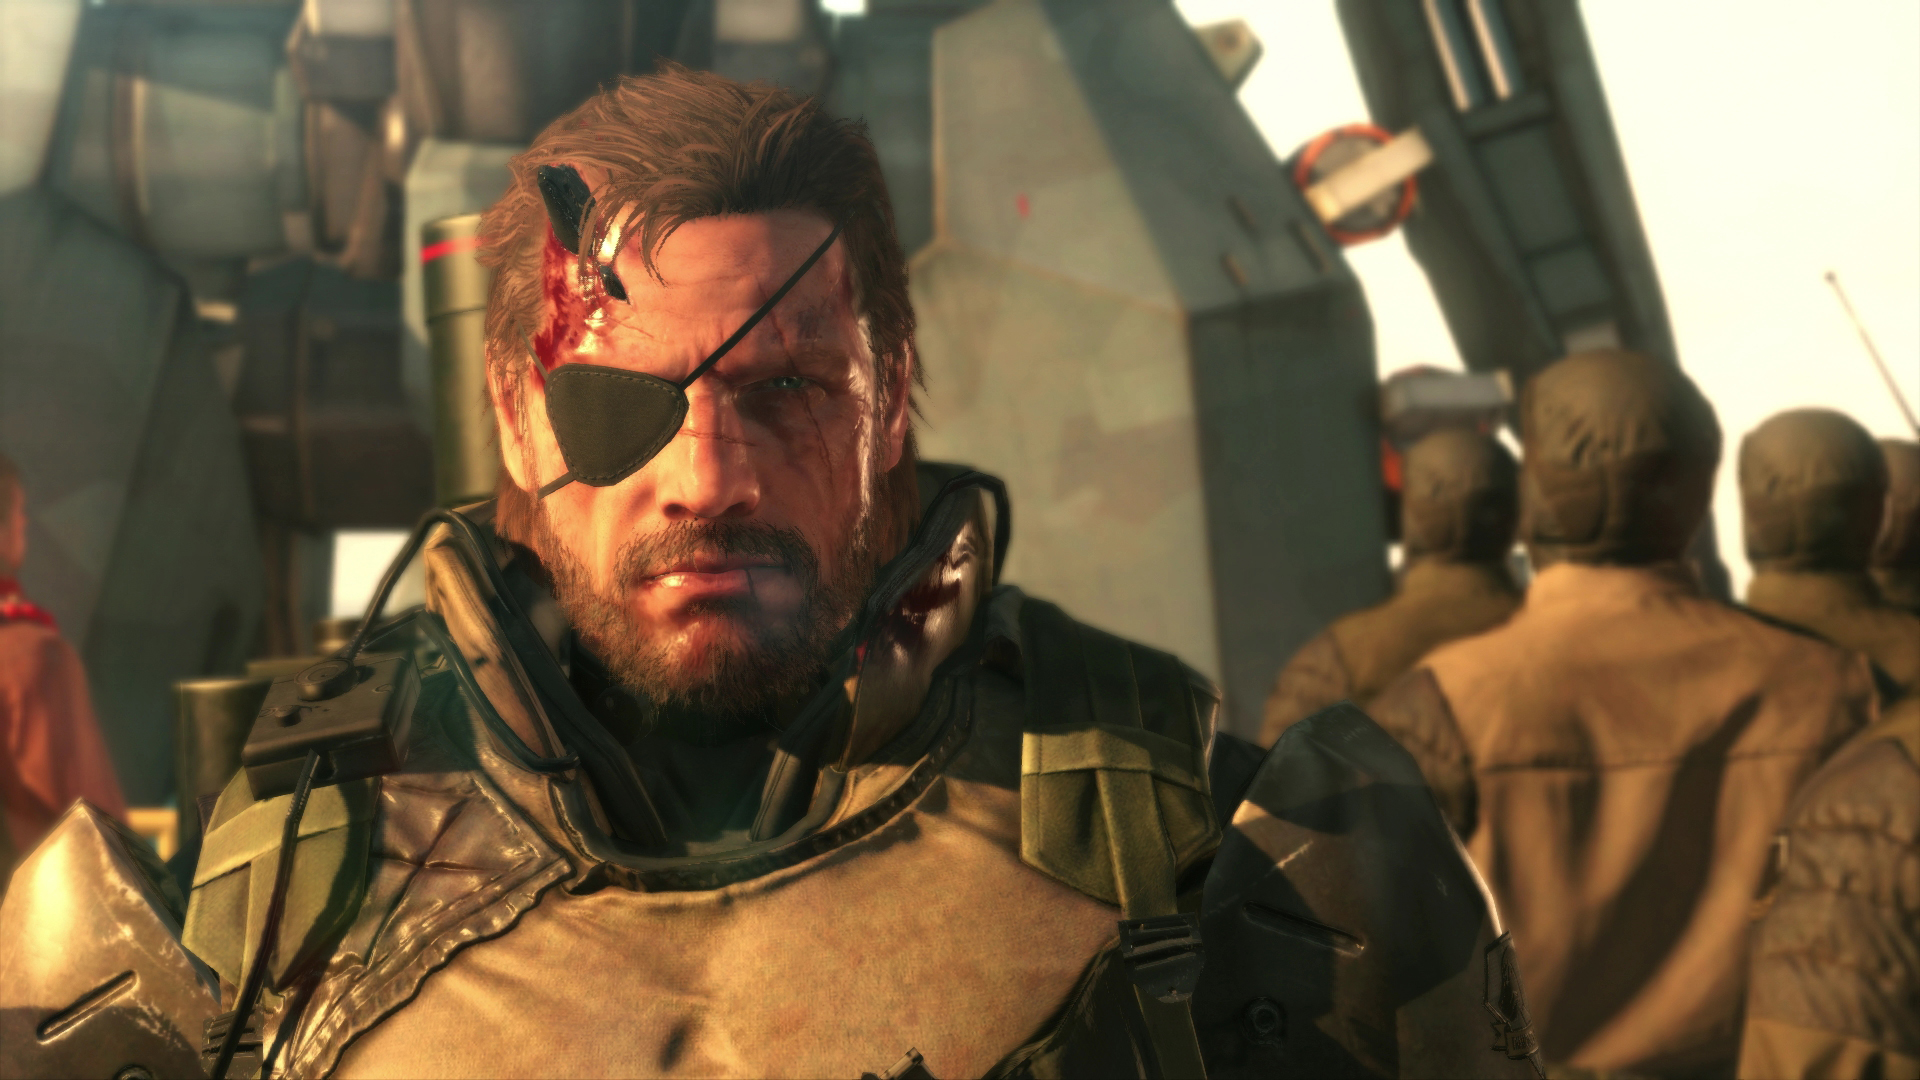 Metal Gear Solid V The Phantom Pain Android/iOS Mobile Version Full Free Download